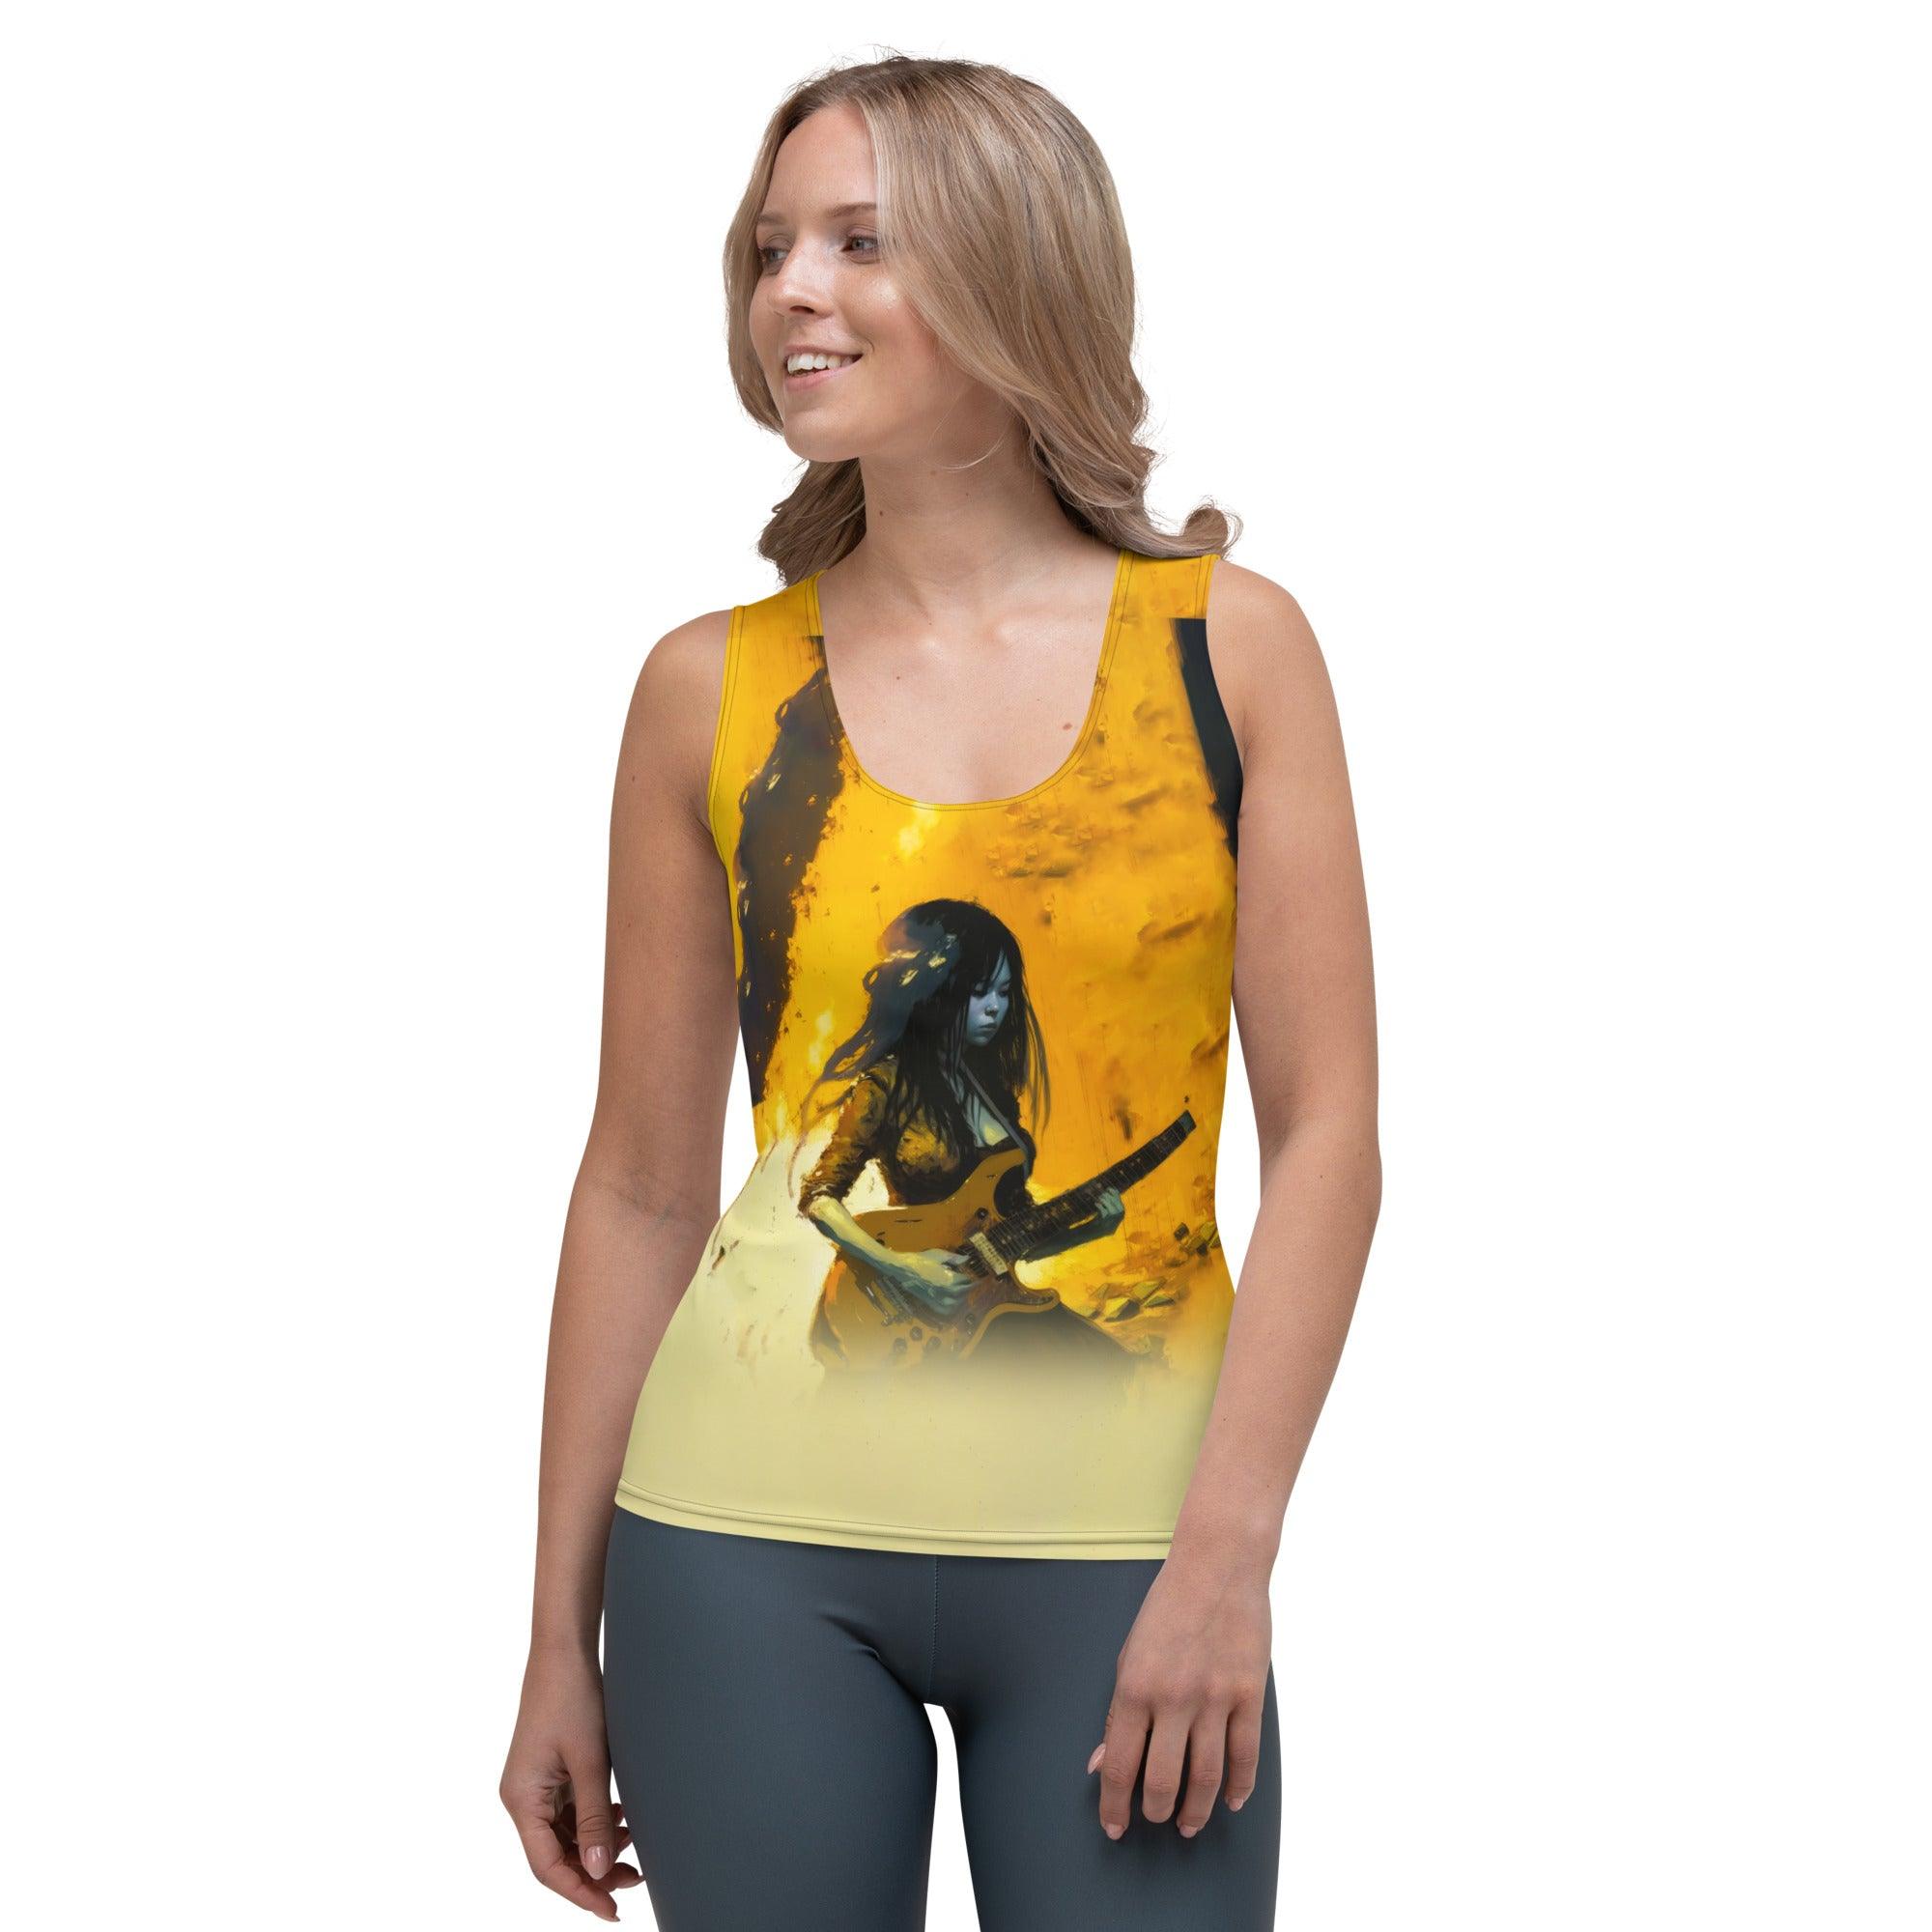 NS 804 Sublimation tank top front view.